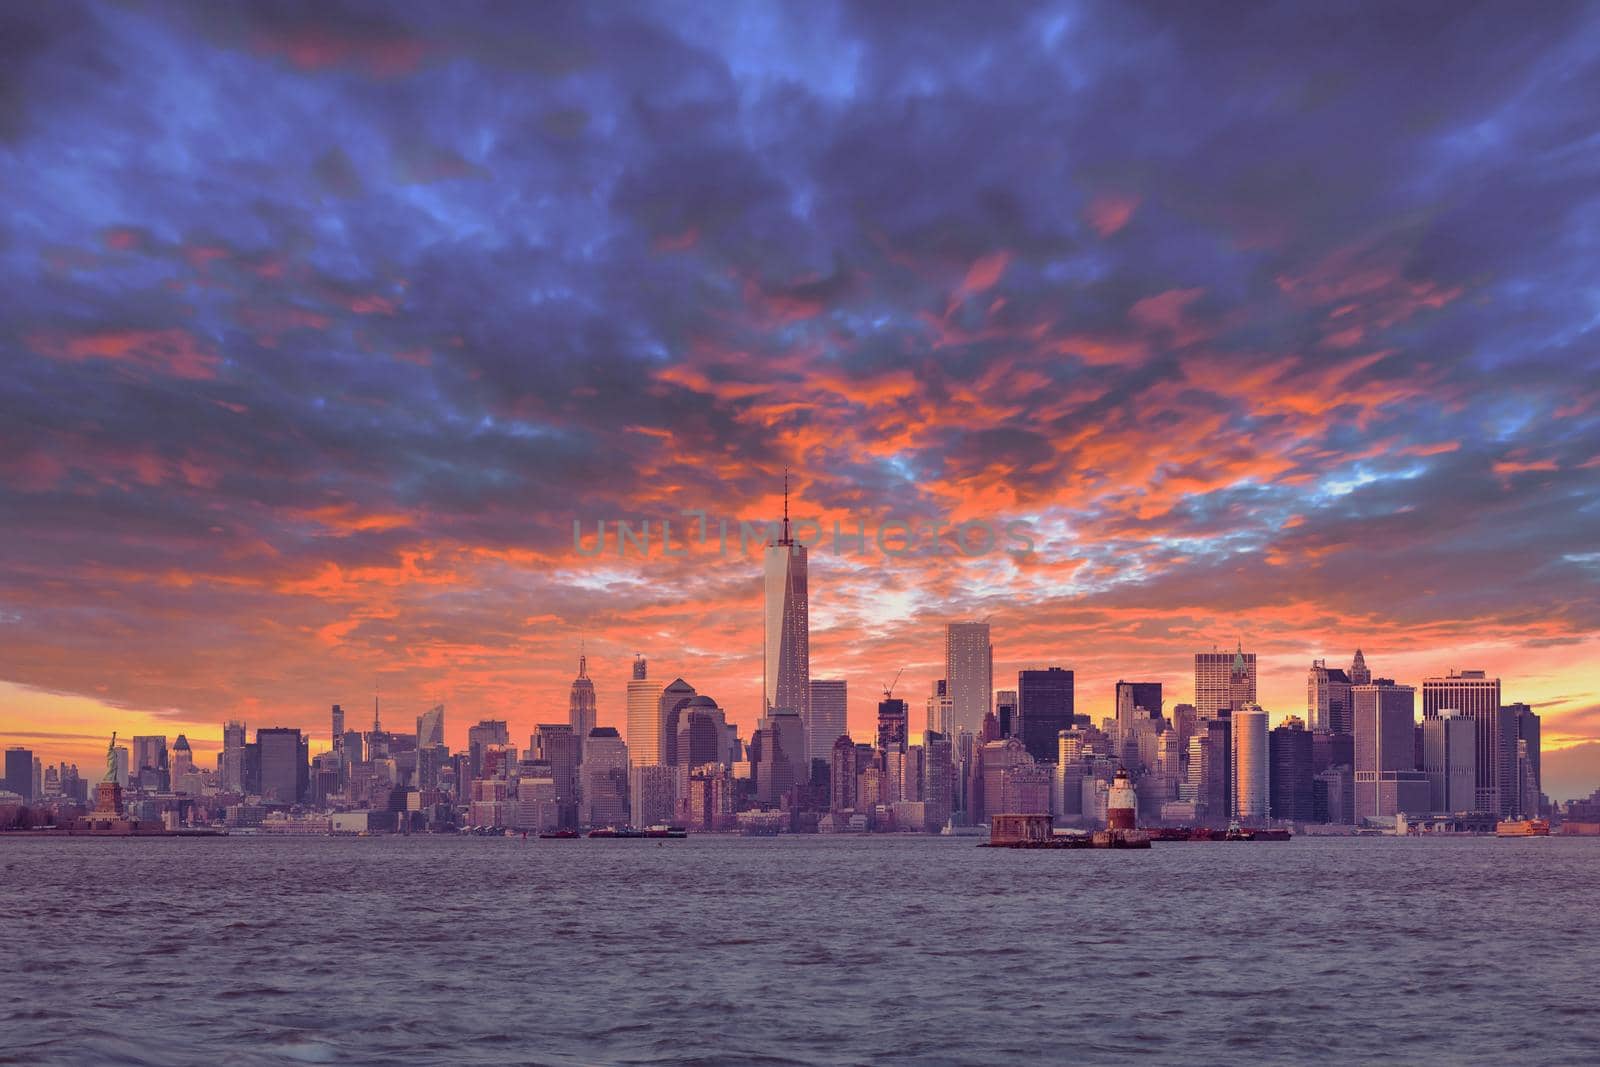 New York City Manhattan downtown skyline at dusk with skyscrapers illuminated over Hudson River panorama. Dramatic sunset sky. by kasto